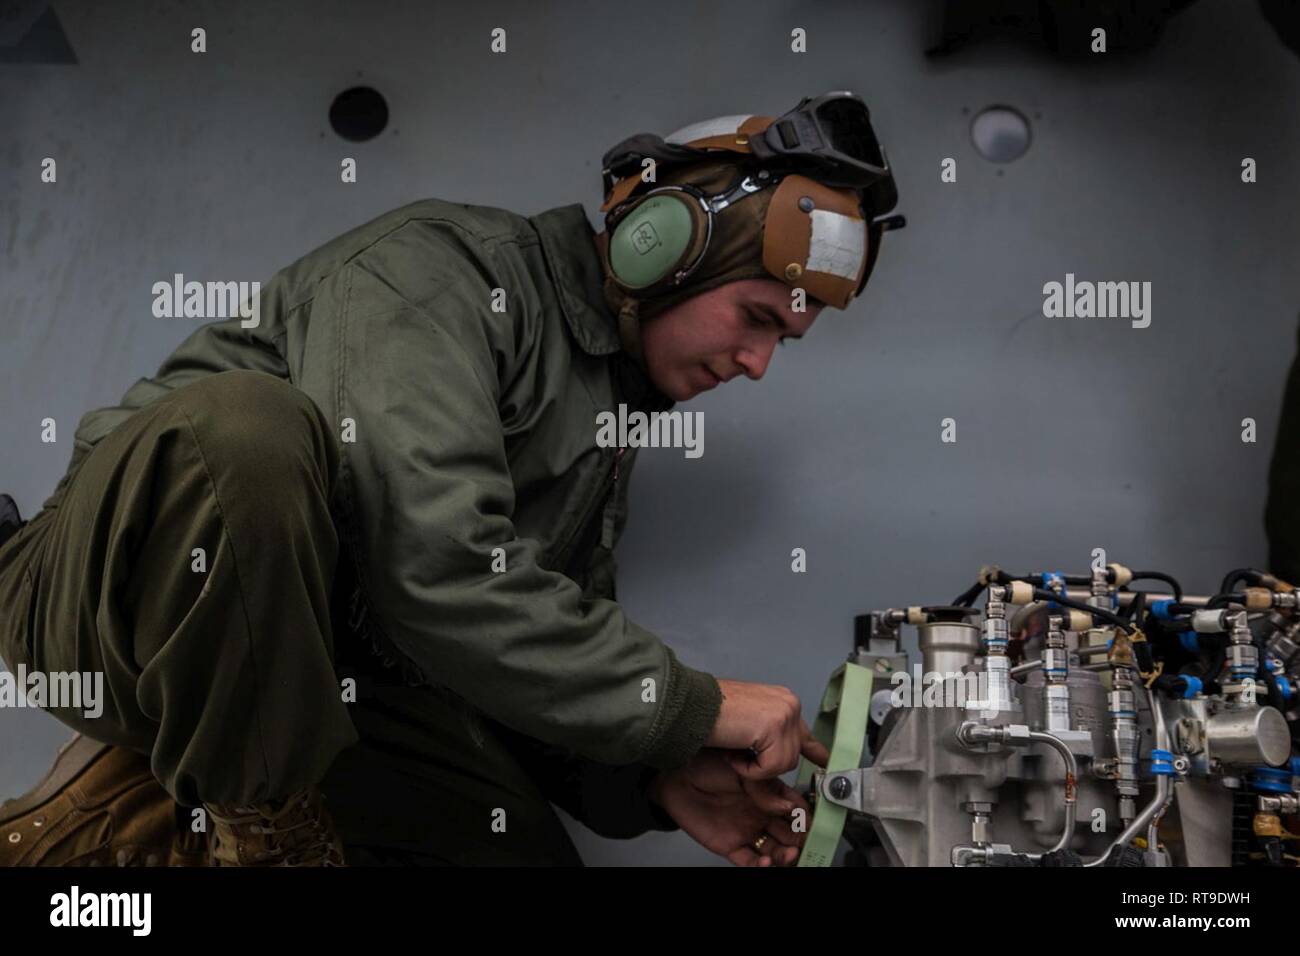 Sgt. Riley D. Schroer, a tiltrotor mechanic with Marine Medium Tiltrotor Squadron 262 (Reinforced), prepares an auxiliary power unit for installation onto an MV-22B Osprey tiltrotor aircraft atop the flight deck aboard the amphibious assault ship USS Wasp (LHD 1), Philippine Sea, Jan. 27, 2019. Schroer, a native of Liberty, Missouri, graduated from Liberty High School in May 2013 before enlisting in July the same year. VMM-262 (Rein.) is the Aviation Combat Element for the 31st Marine Expeditionary Unit. VMM-262 (Rein.) maintainers ensure the squadron’s aircraft are safe for flight during flig Stock Photo